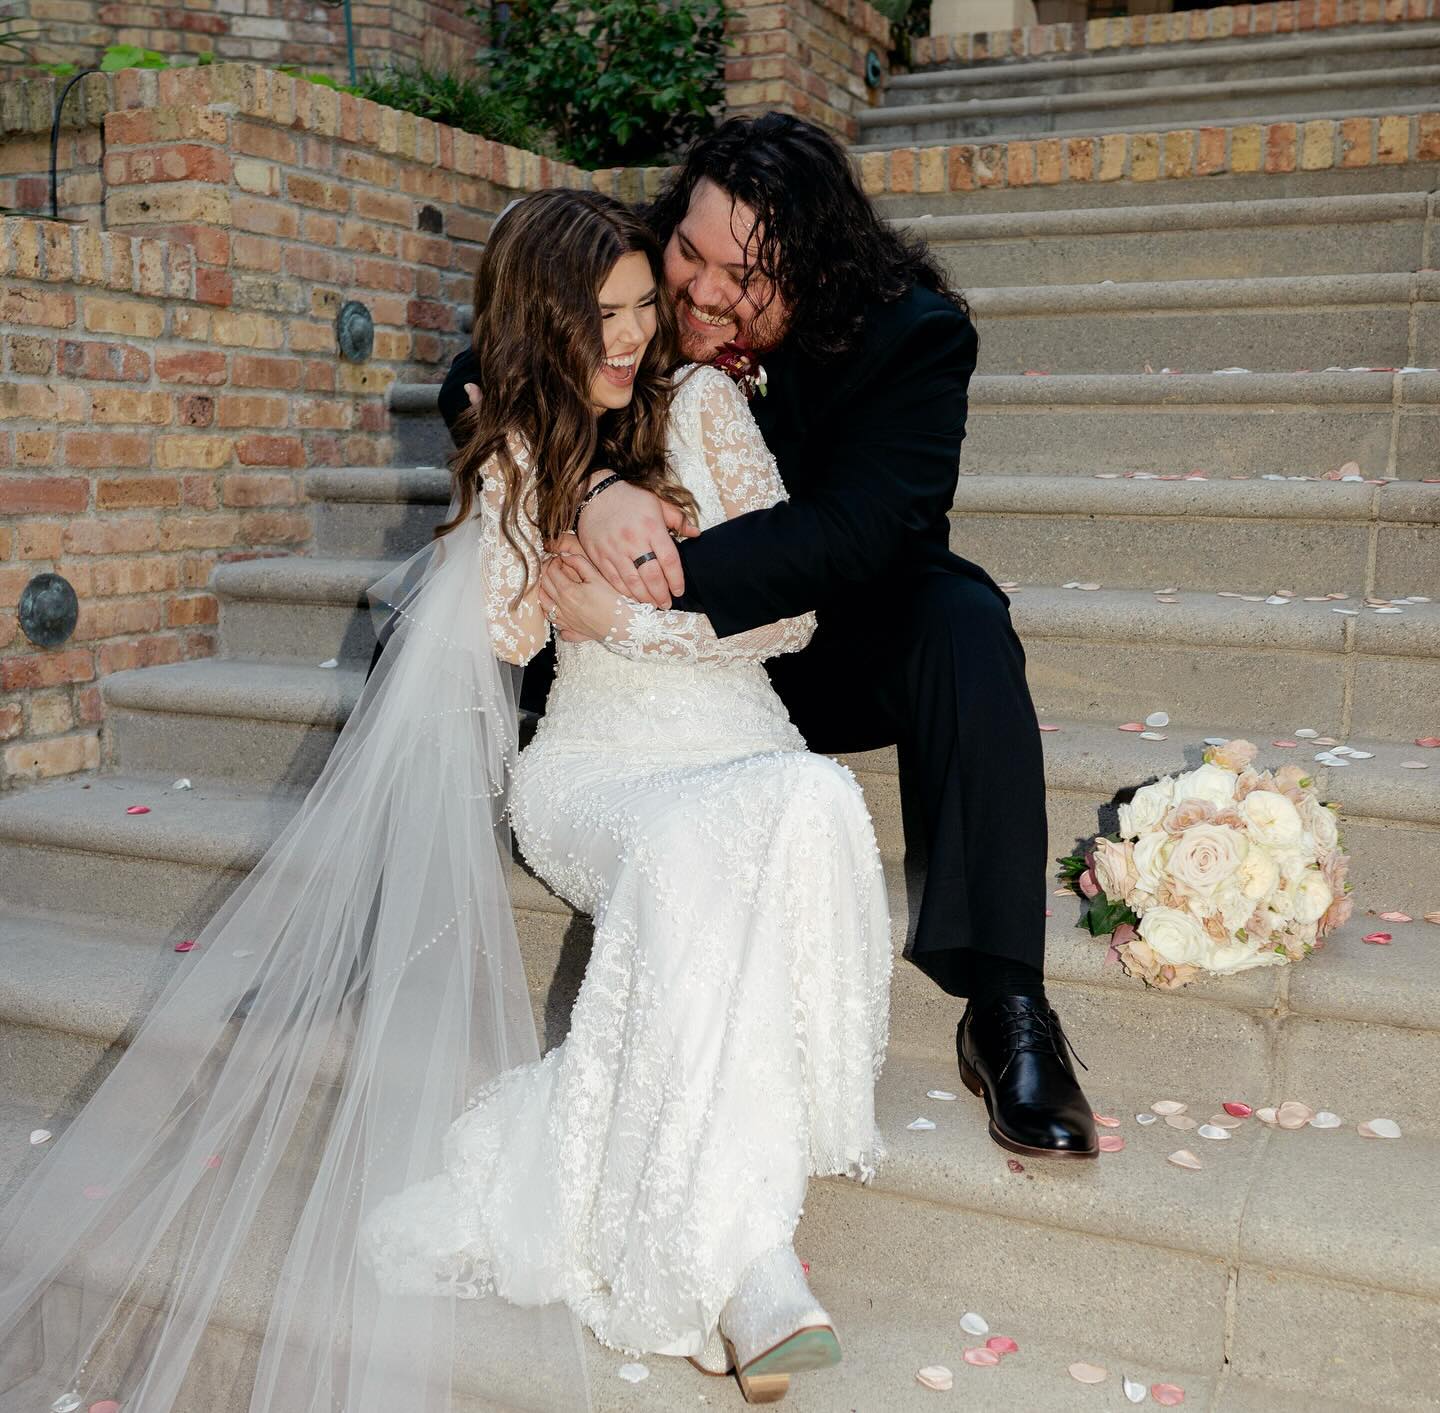 Wolfgang Van Halen with his wife, Andraia Allsop, on their wedding day